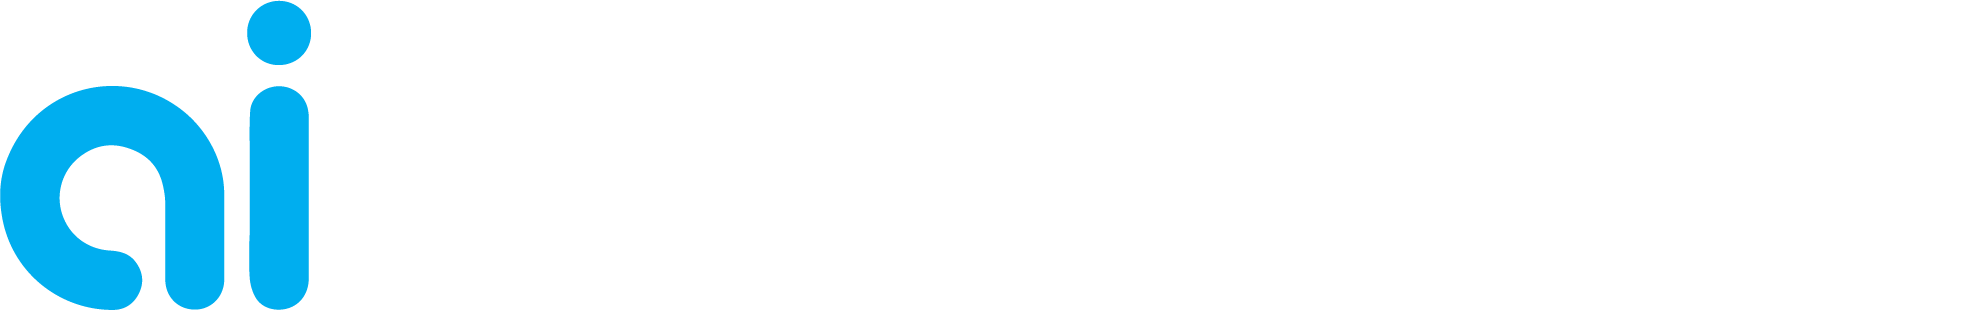 The AI Solution logo - the letters "ai" written in lowercase are blue, and the letters "Solution", written in uppercase are white